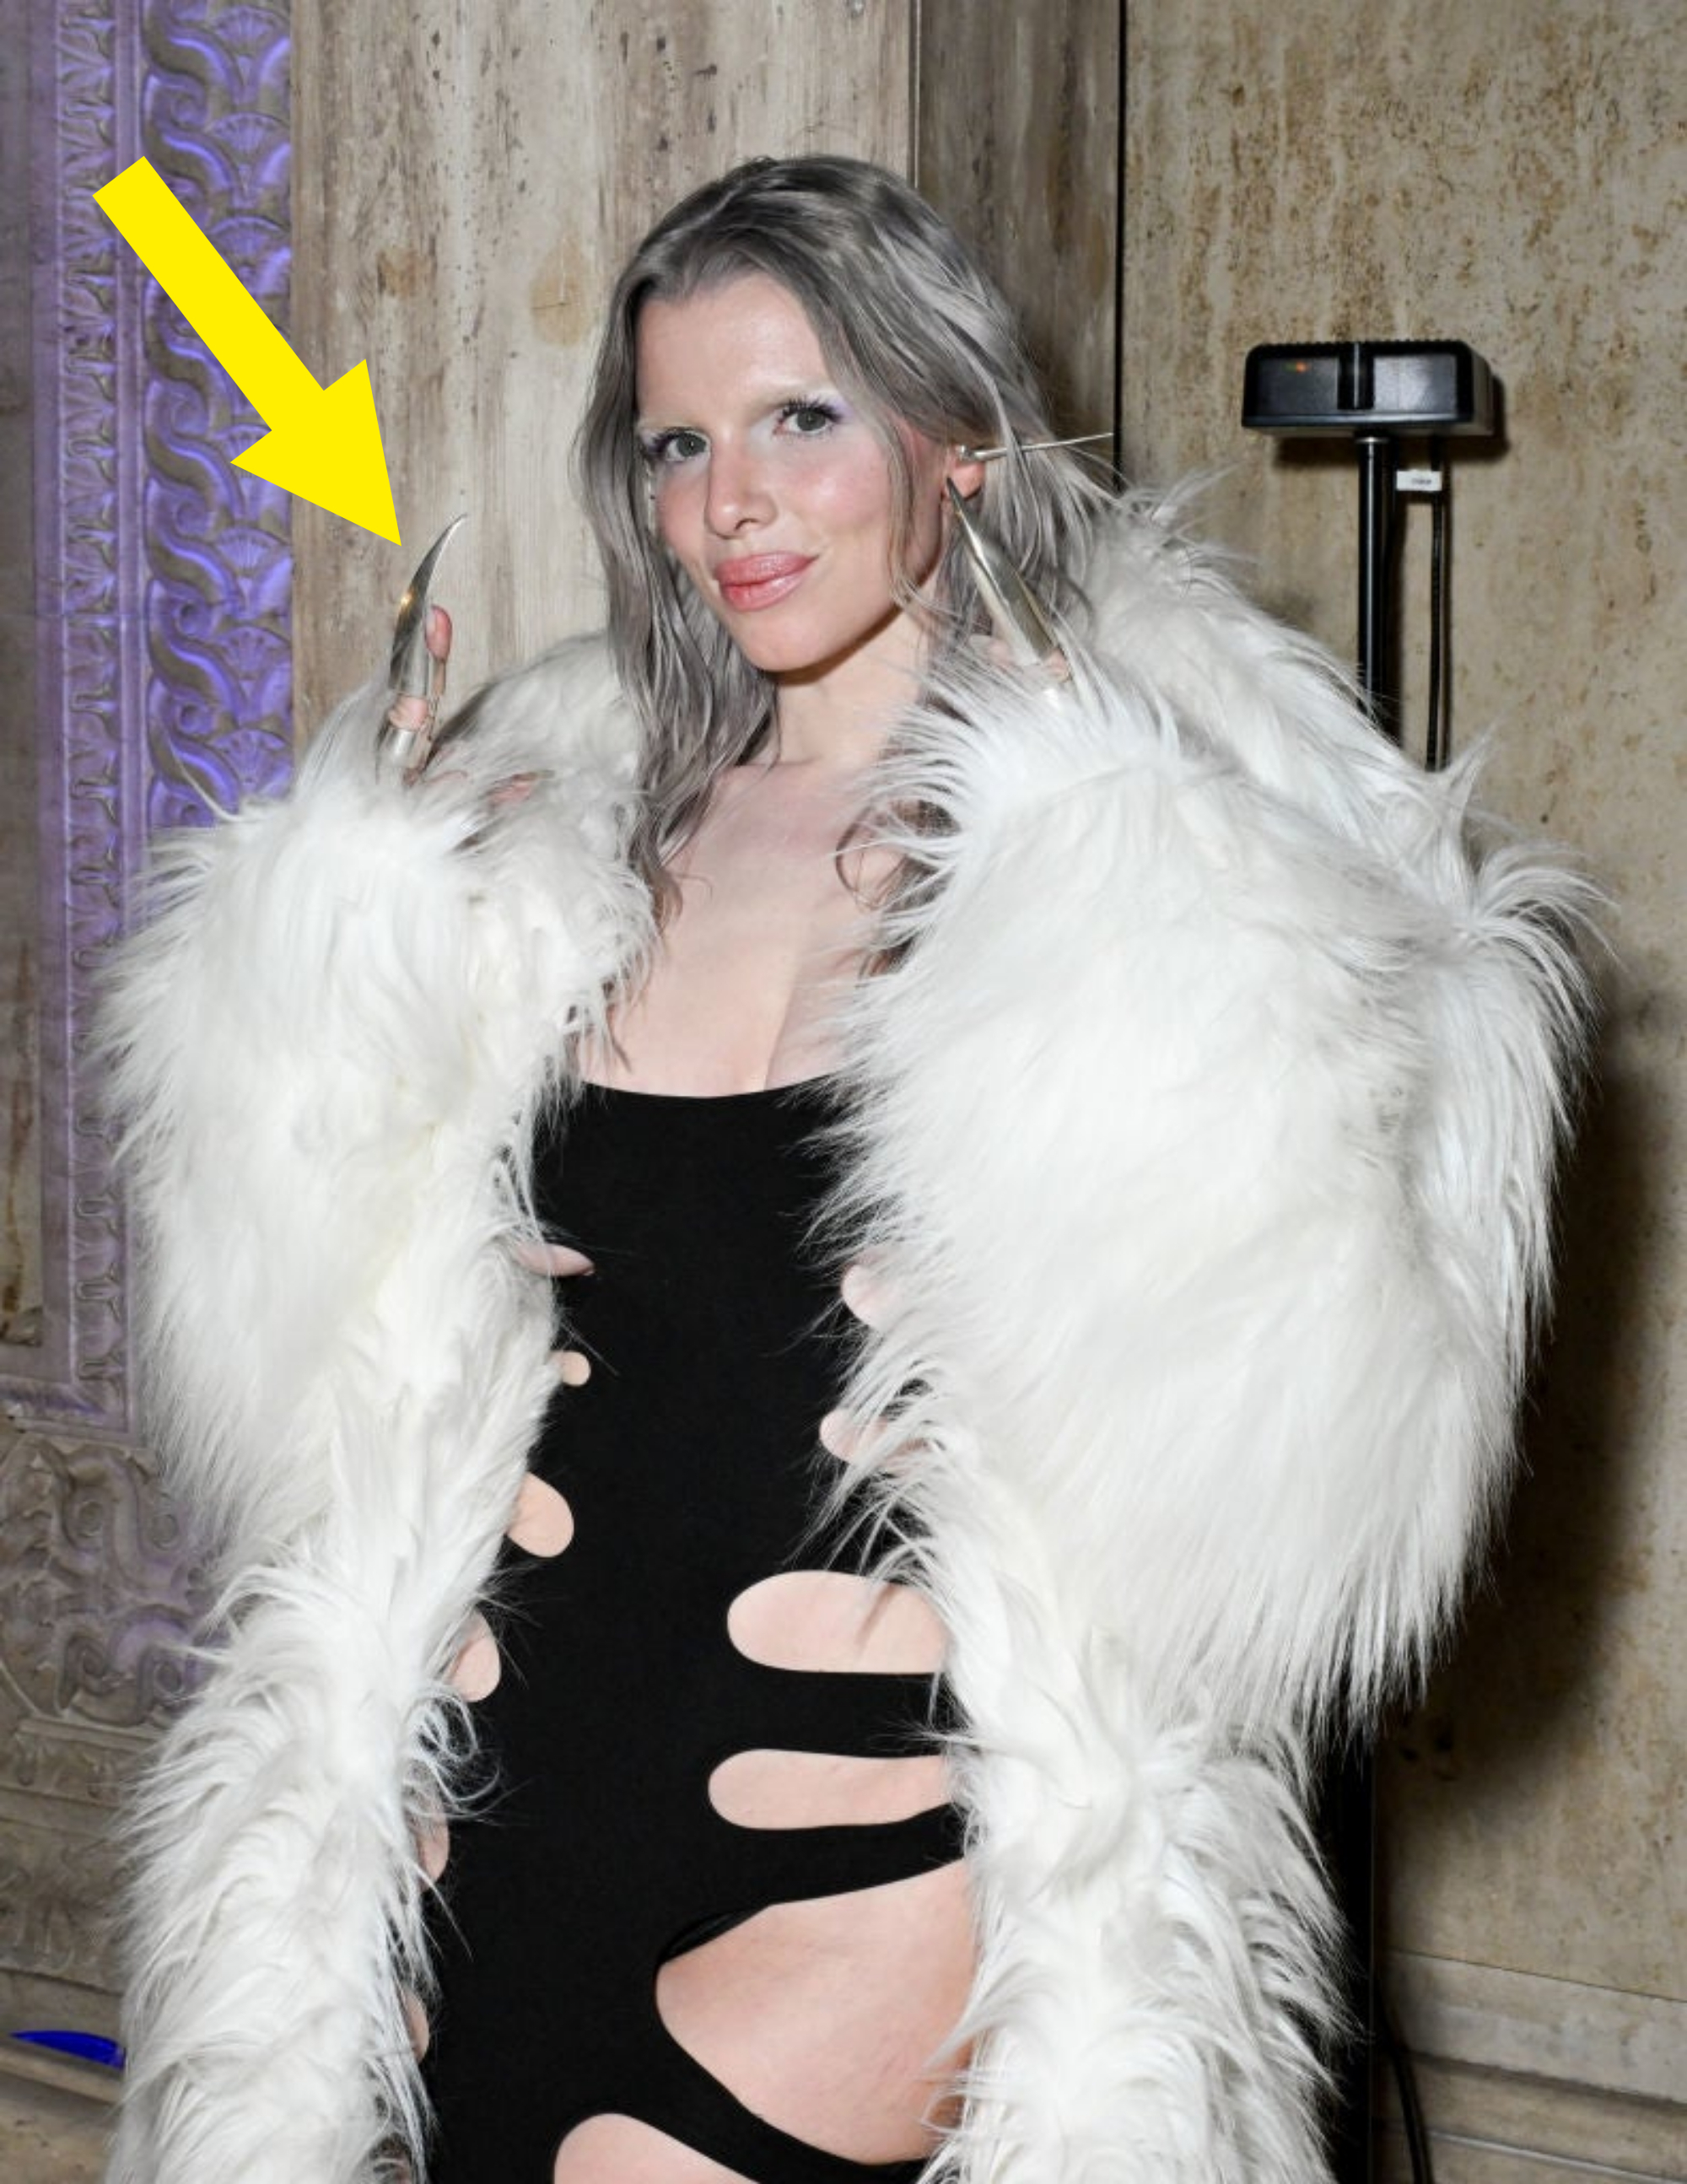 Julia posing with white fur coat and black dress with cut-outs